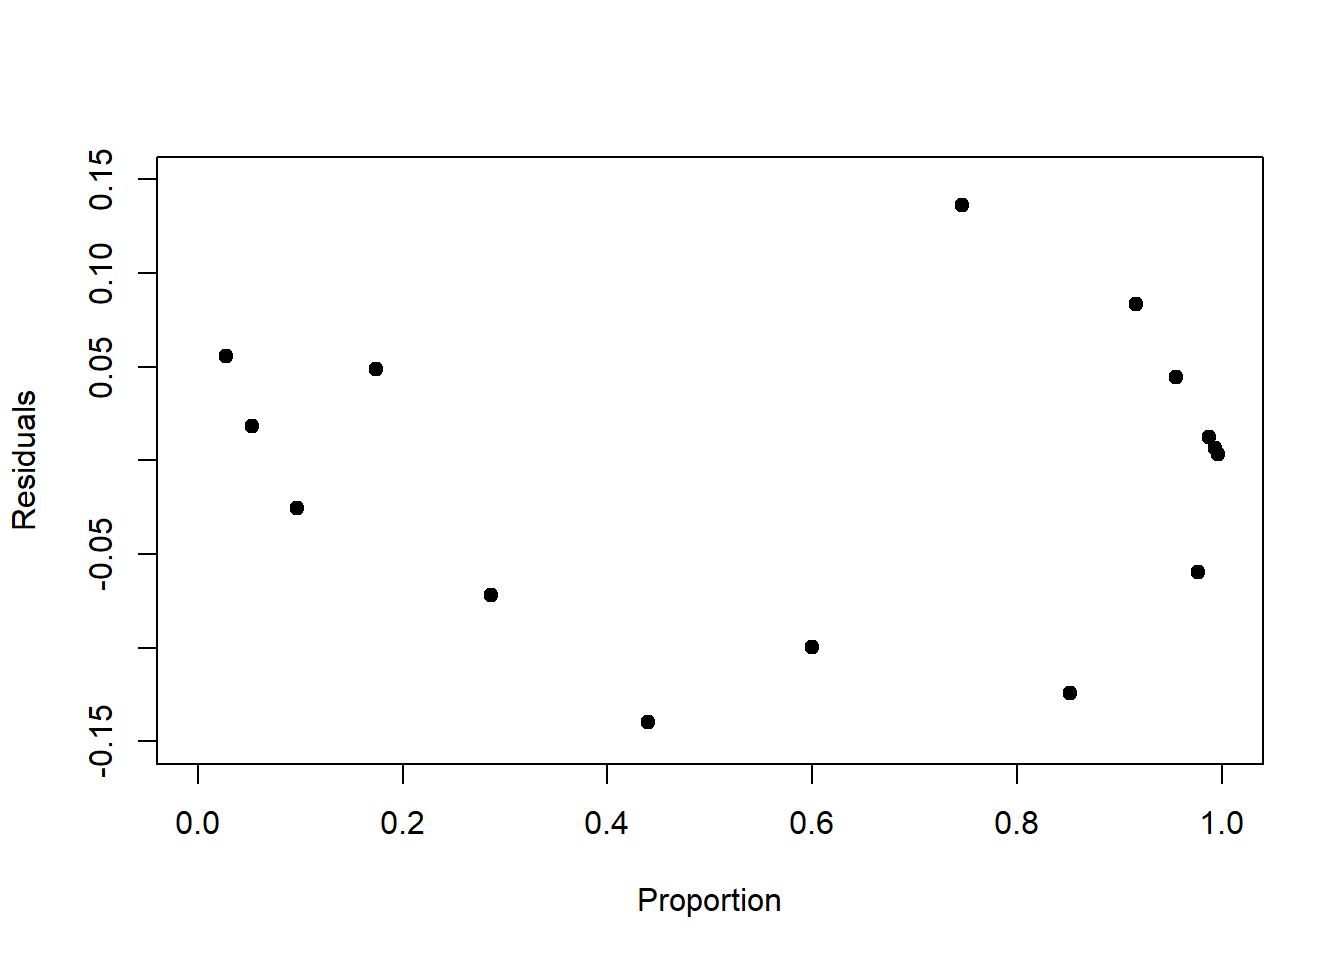 Left: Raw residuals of the log-linear model fit to the birds data. The residual variance by design increases with increasing mean response. Right: Raw residuals of the logistic model fit to the survival data. The residual variance peaks at 0.5 by design.